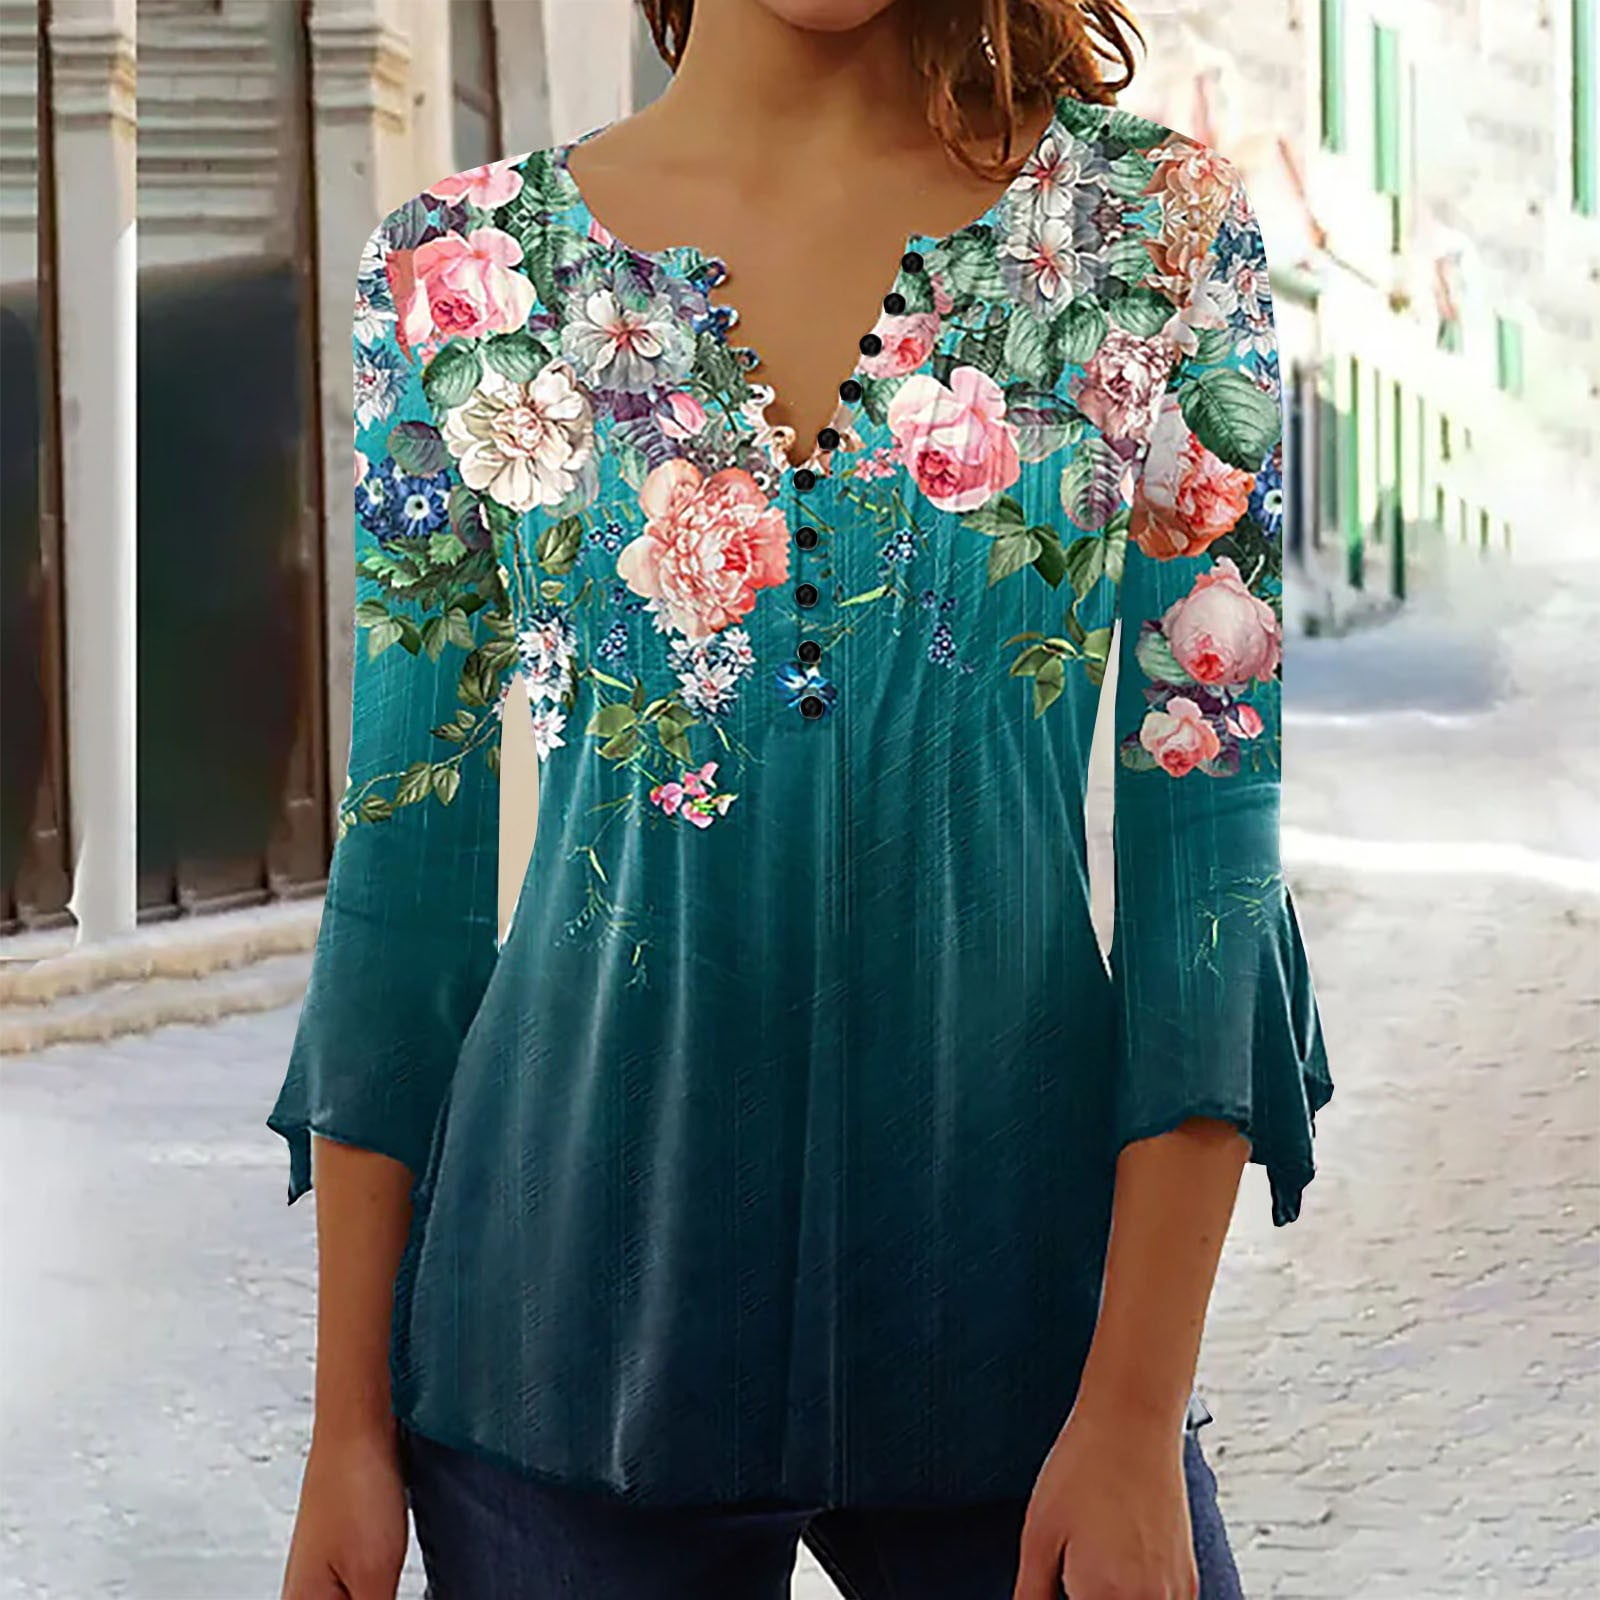 Going Out Tops for Women 3/4 Blue Blouse Floral Women's Dressy Blouses and Tops Plus Size Button Down Spring Shirts Trendy Summer Office Blouses Professional Xl or Xxl Green 3X -